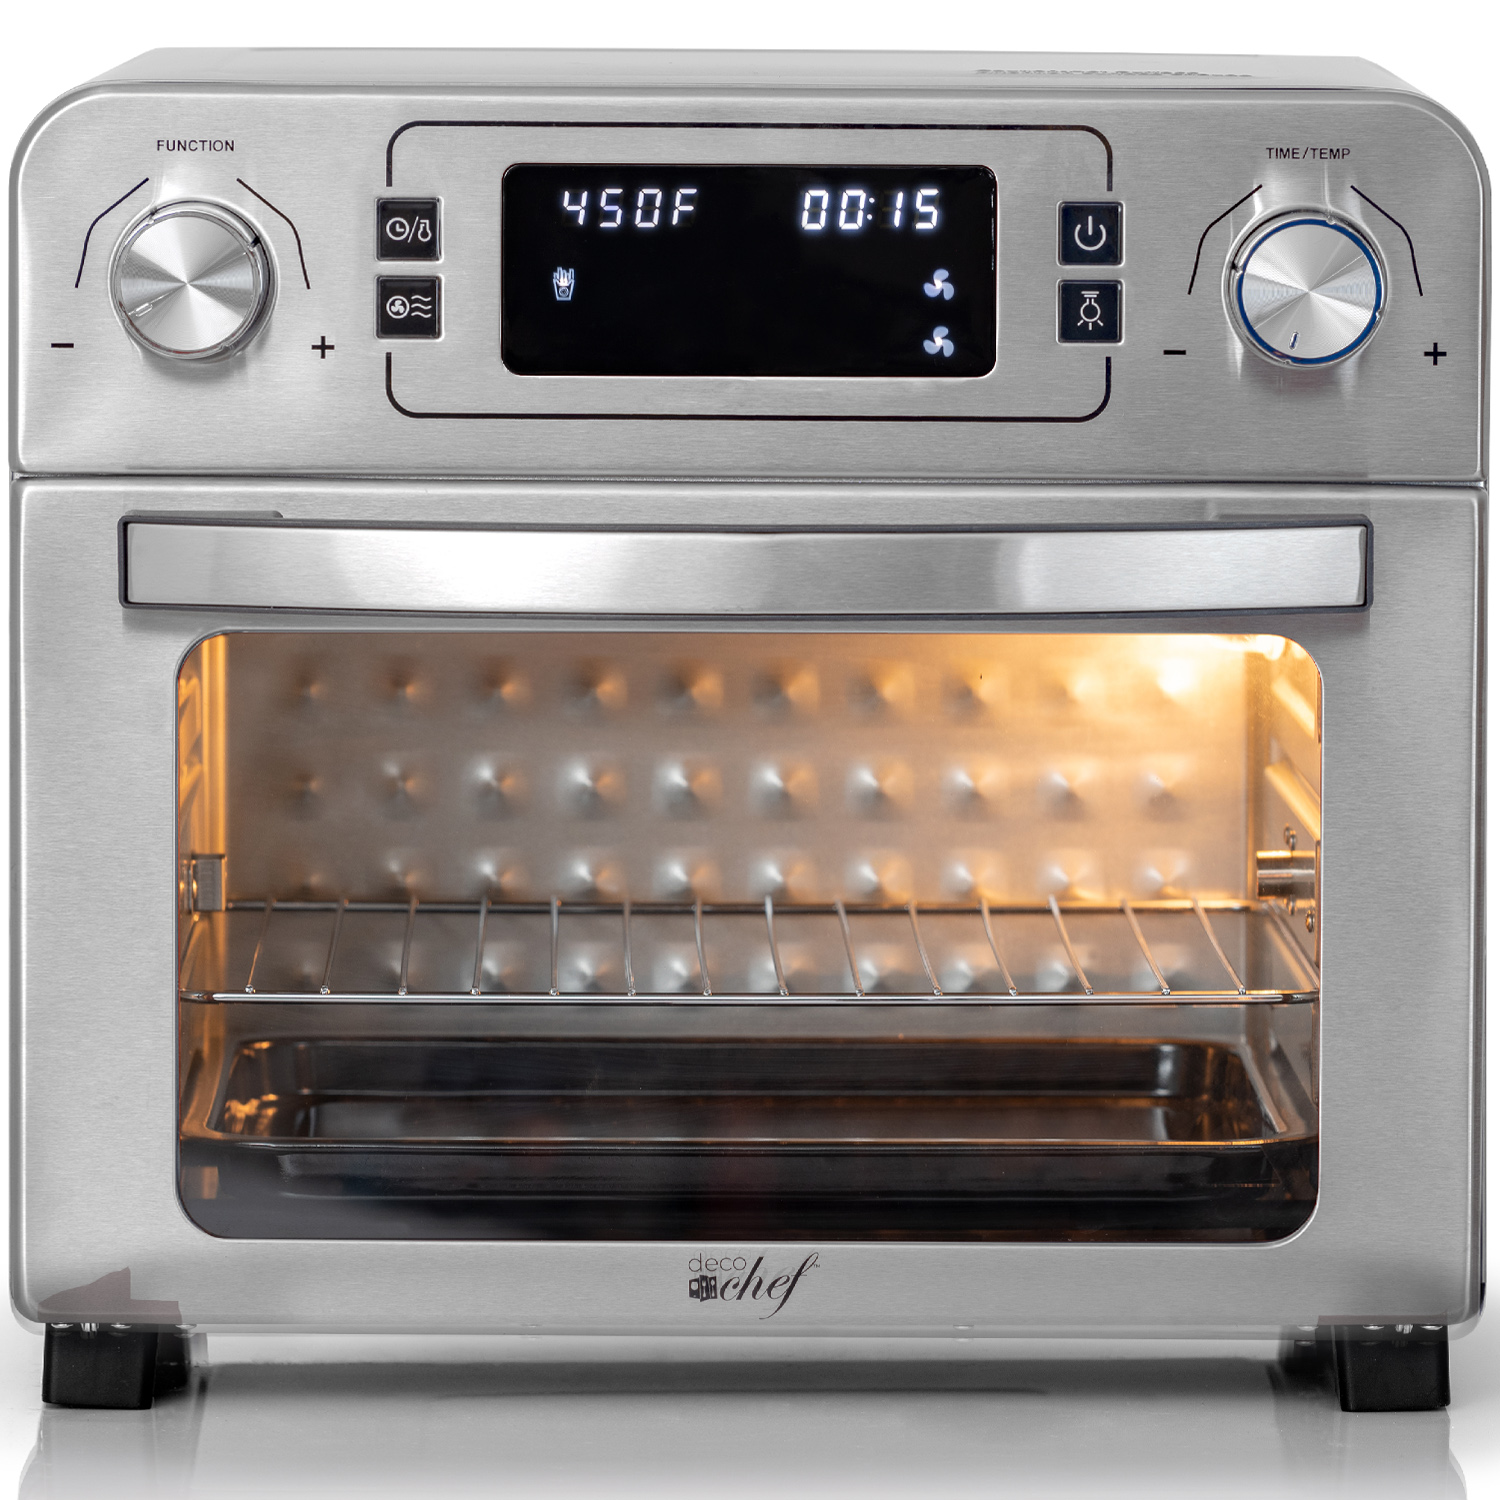 Deco Chef 24 QT Stainless Steel Countertop 1700 Watt Toaster Oven with Built-in Air Fryer and Included Rotisserie Assembly, Grill Rack, Frying Basket, and Baking Pan - image 3 of 11